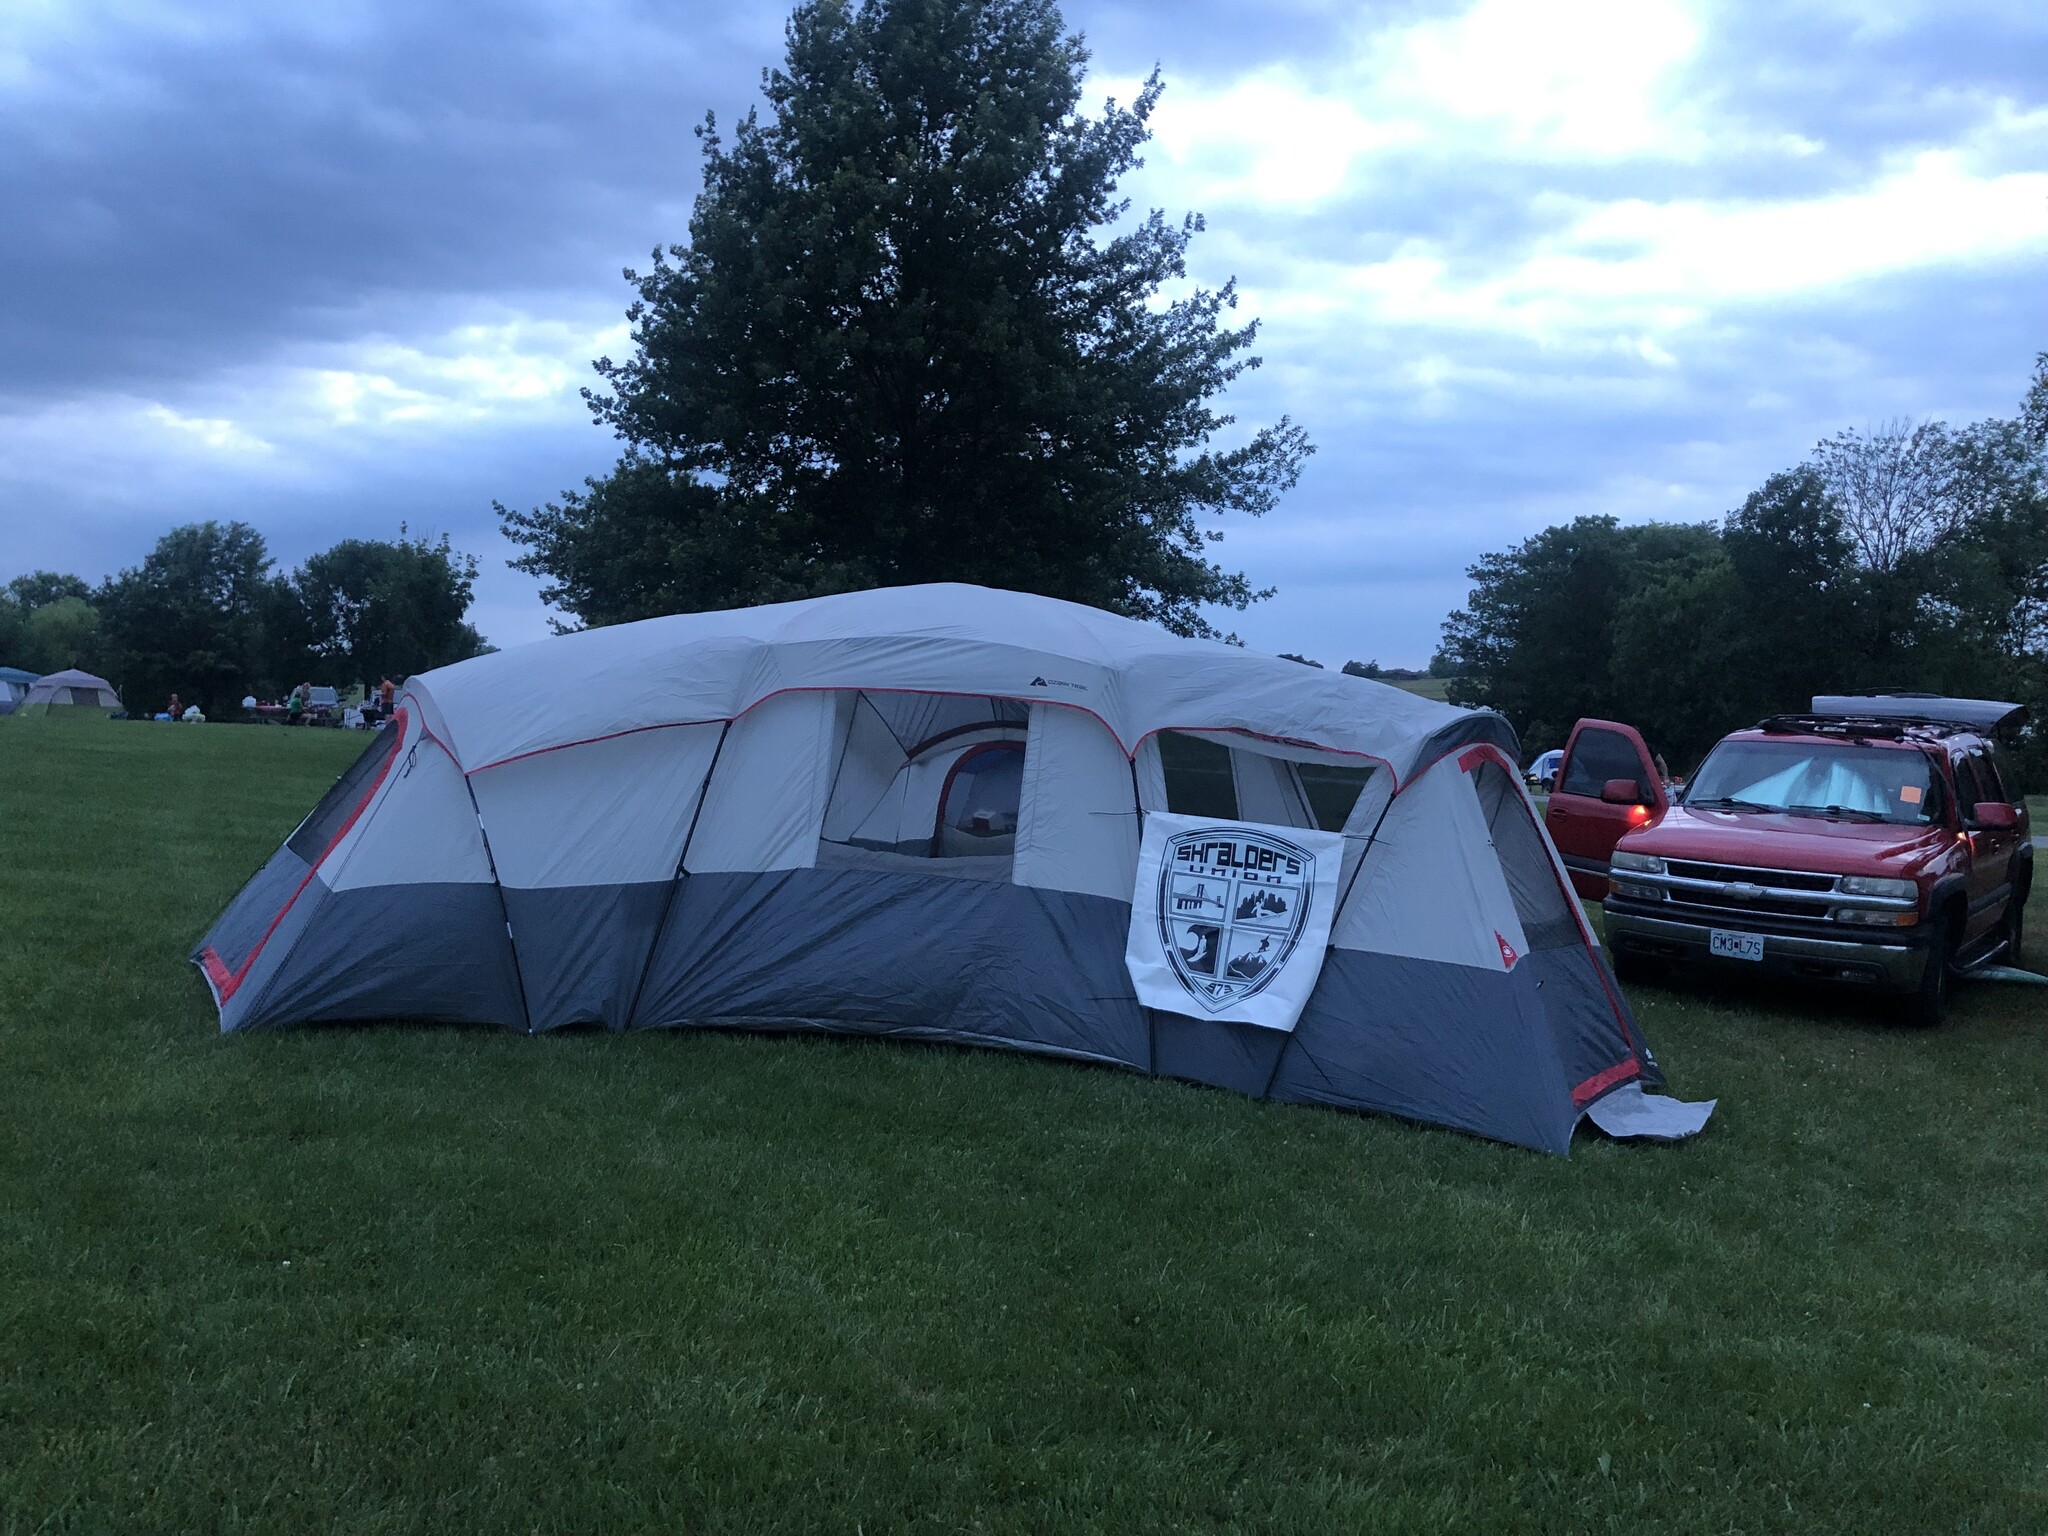 Ozark Trail 20 Person Extended Super Dome Tent 